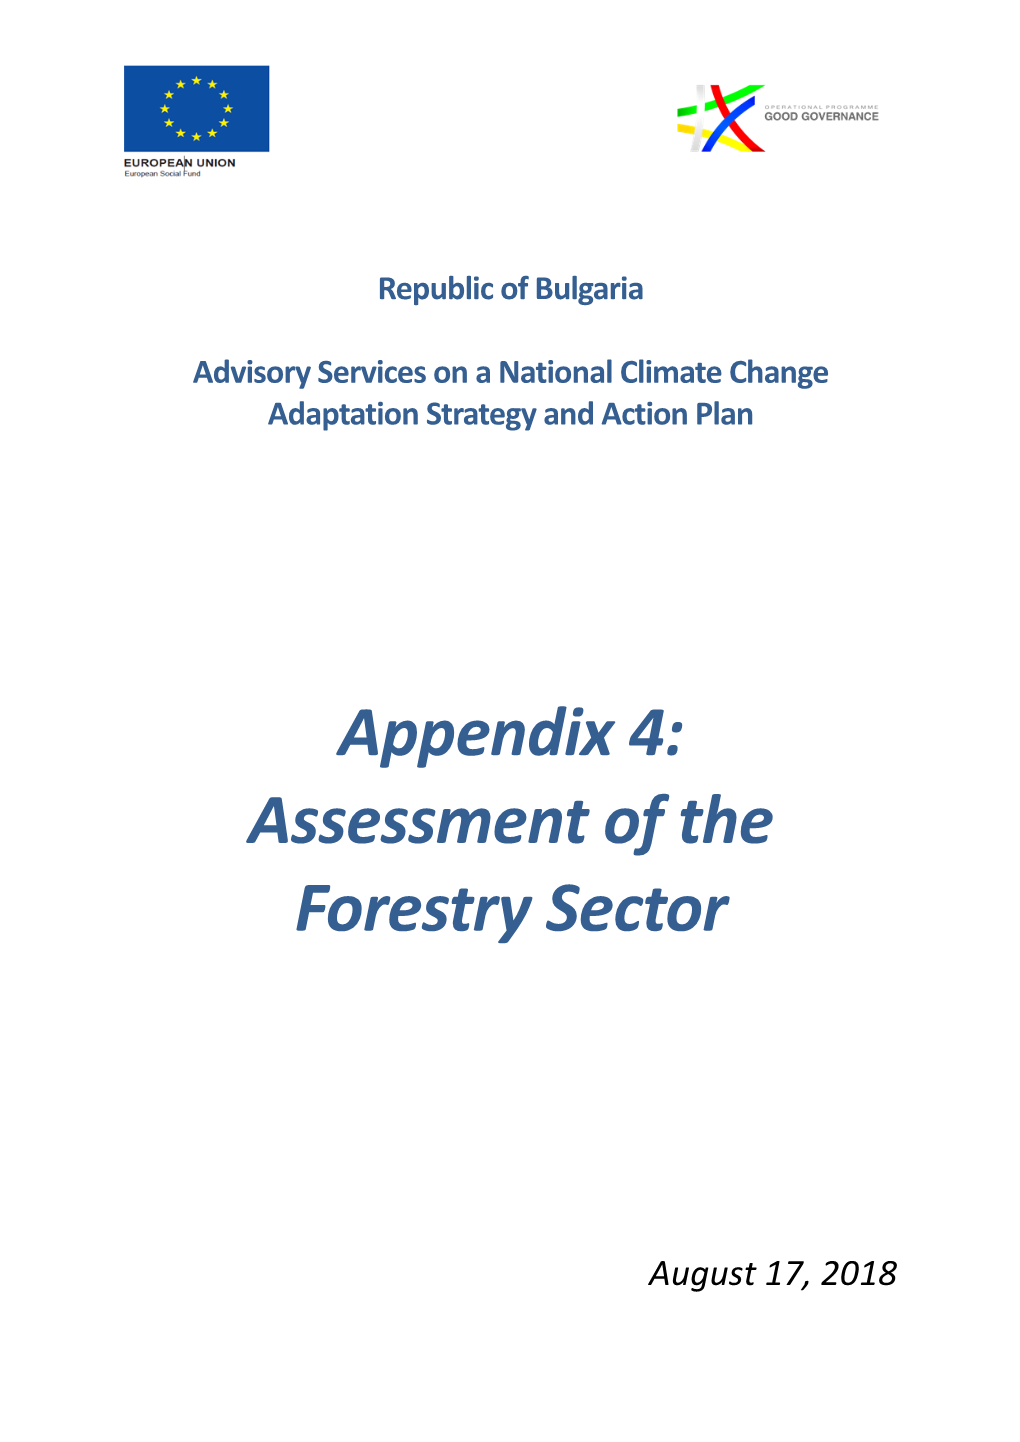 Appendix 4: Assessment of the Forestry Sector